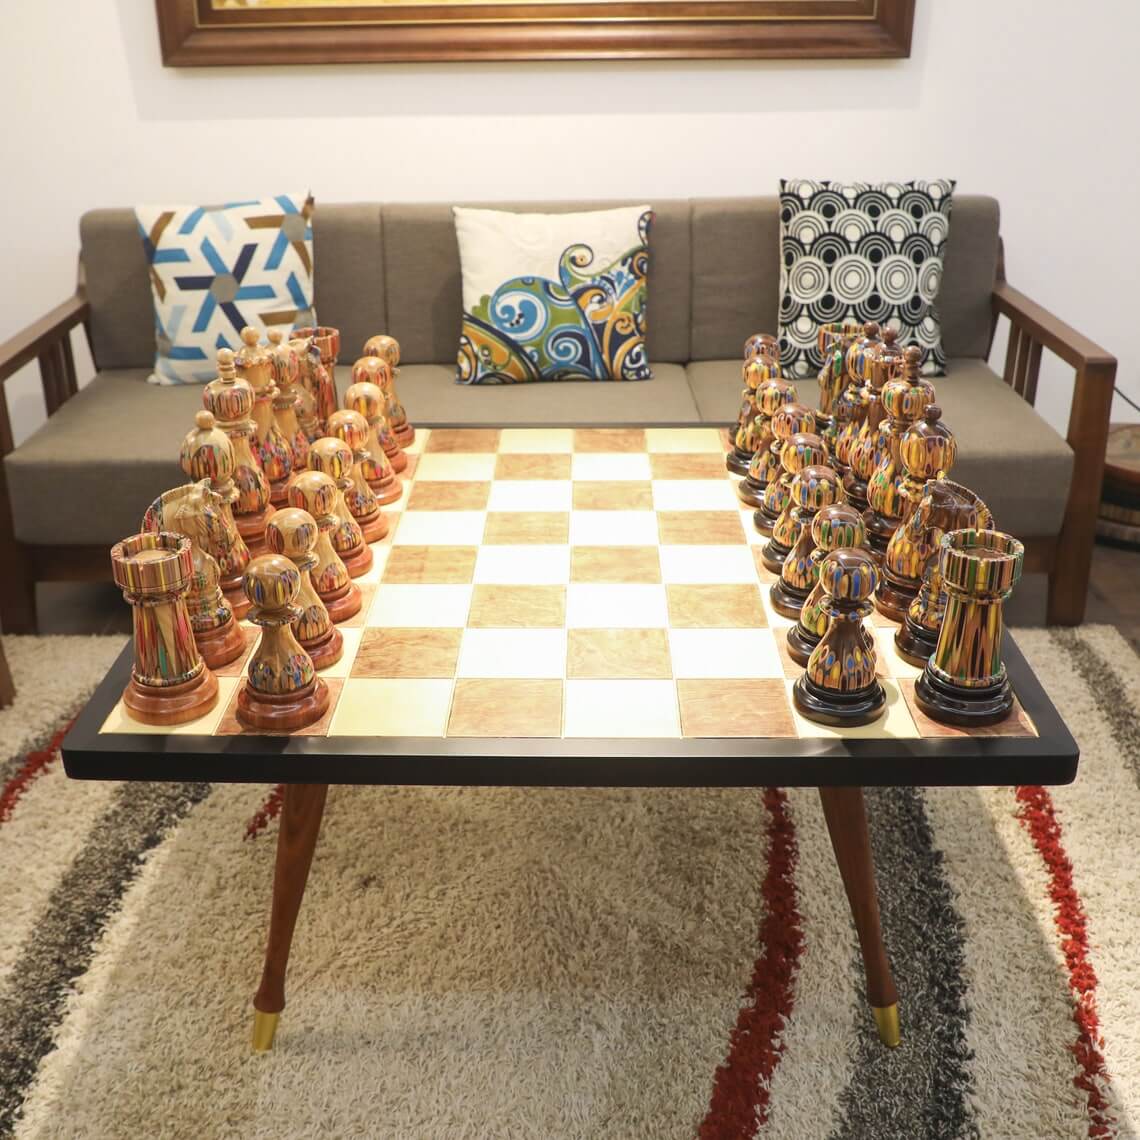 giant chess pieces decoration